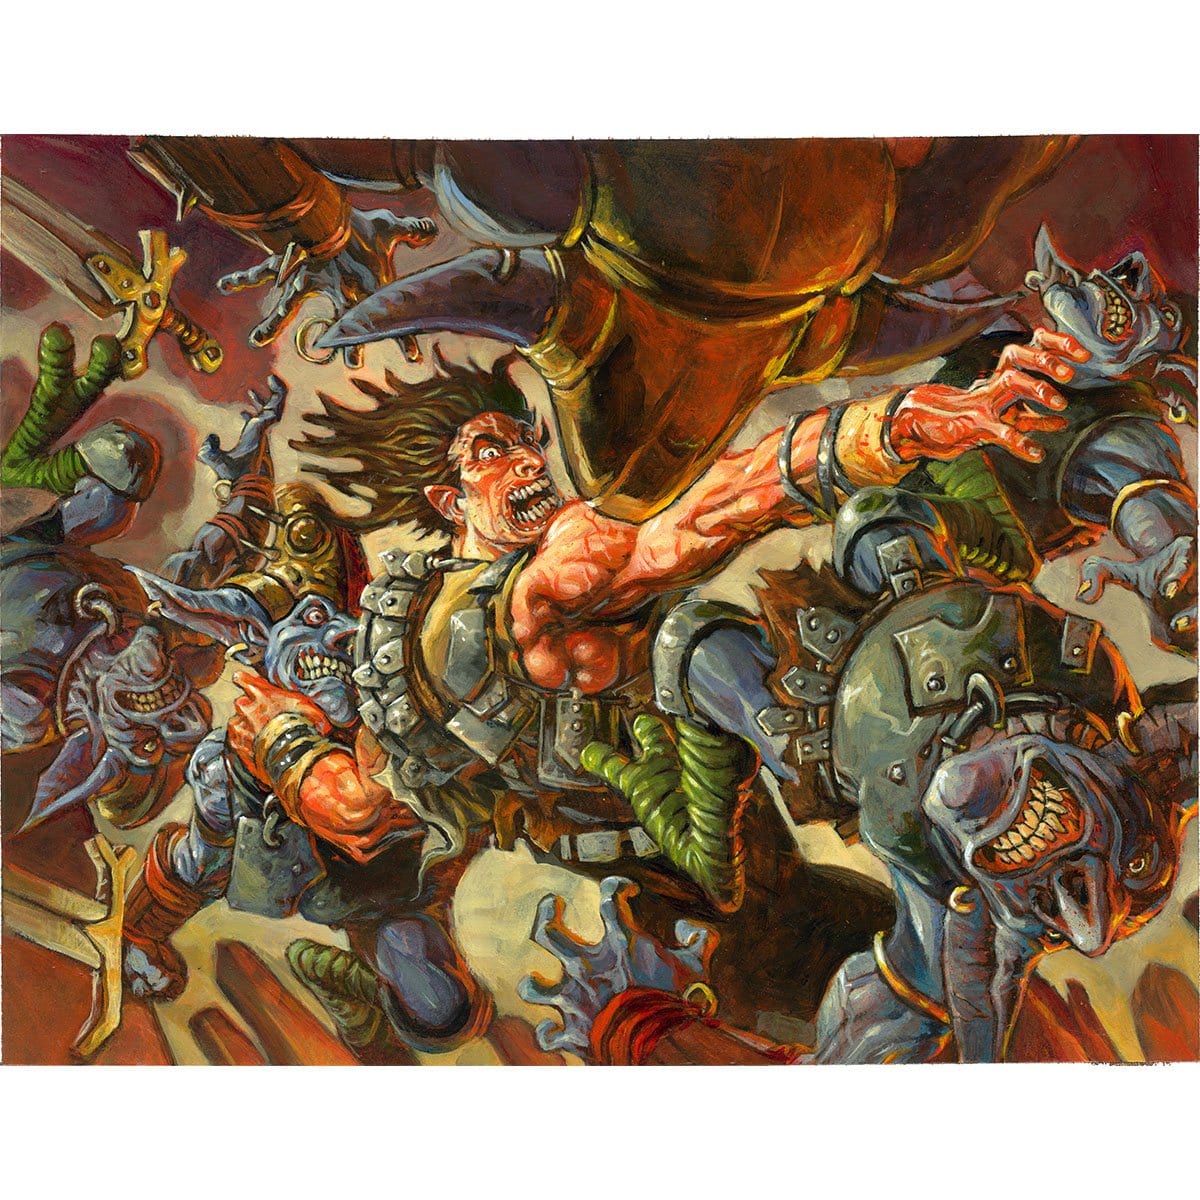 Fatal Frenzy Print - Print - Original Magic Art - Accessories for Magic the Gathering and other card games